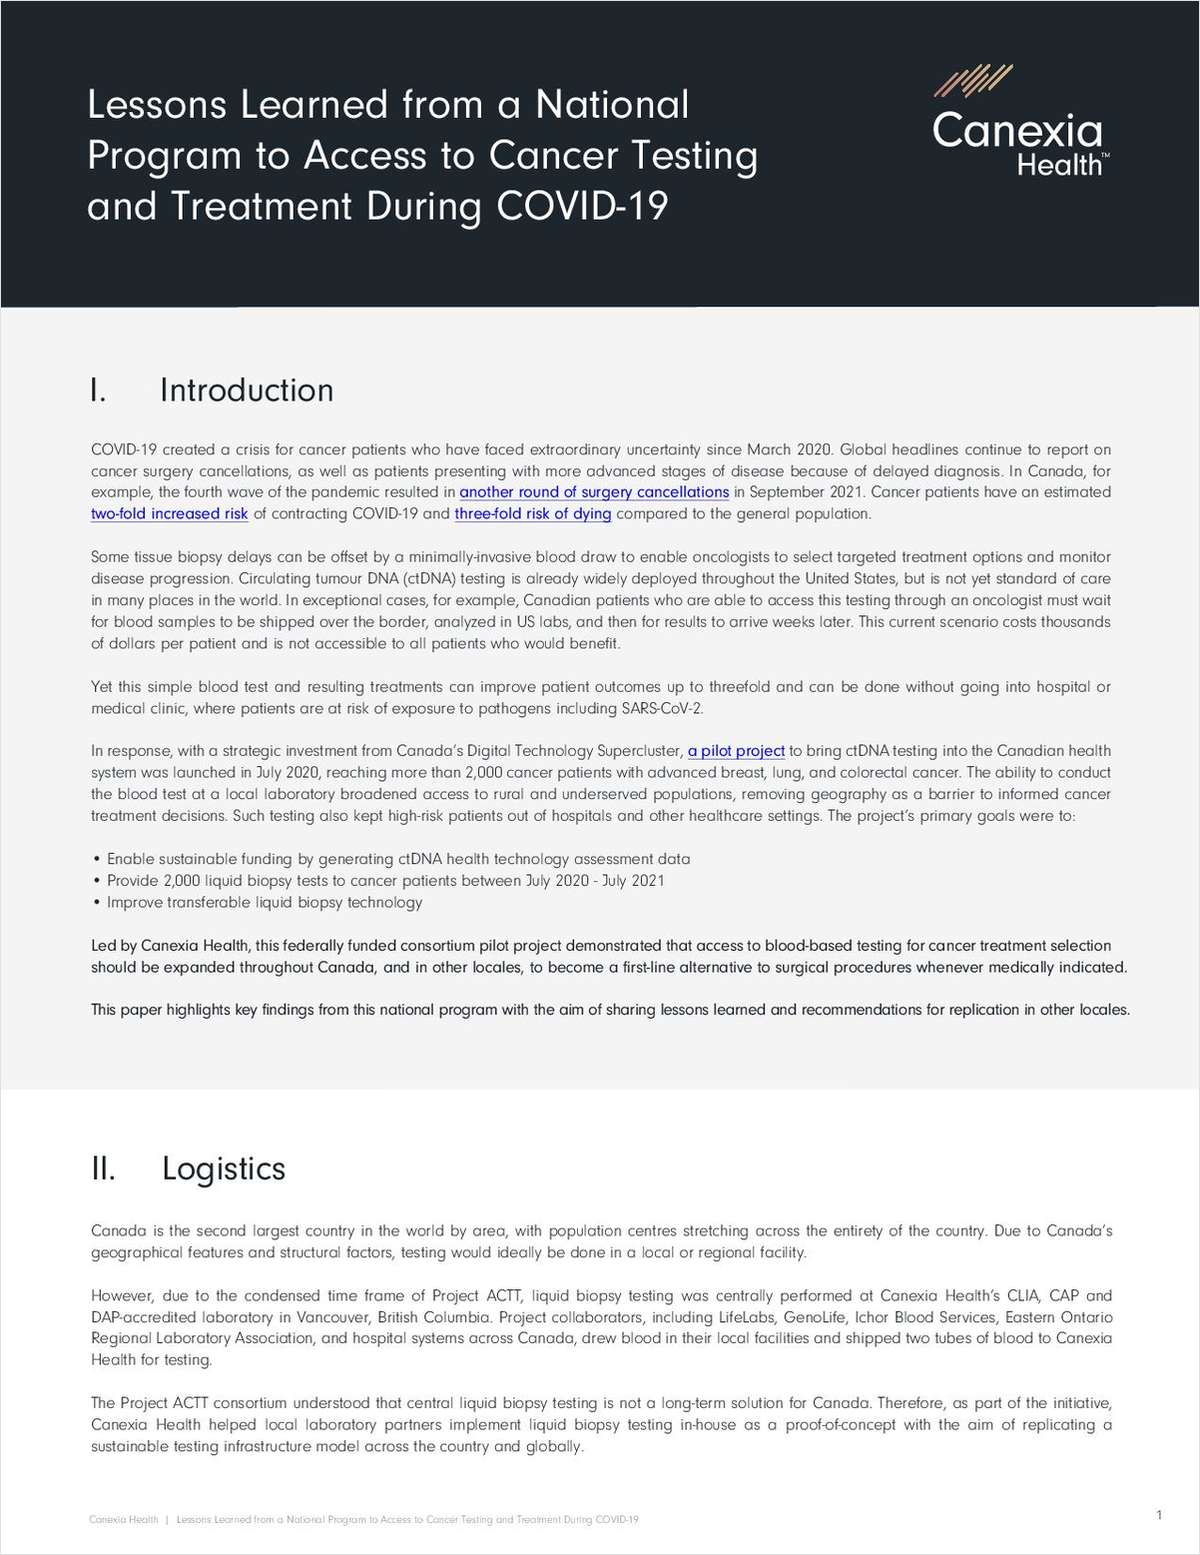 Lessons Learned from a National Program to Improve Access to Cancer Testing and Treatment During COVID-19